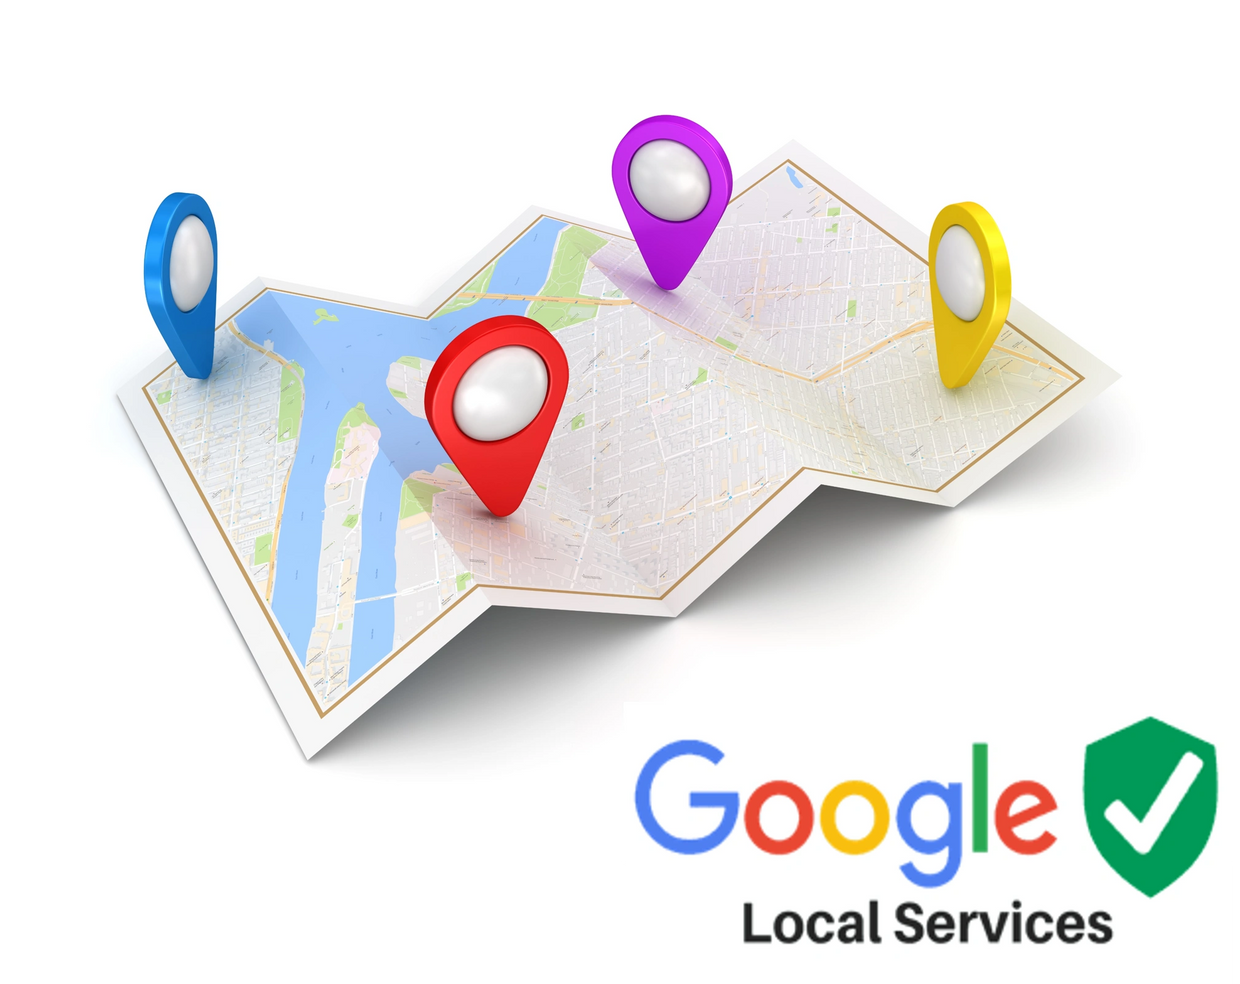  Local Service Ads - Boost Your Business Locally with Targeted Online Advertising.